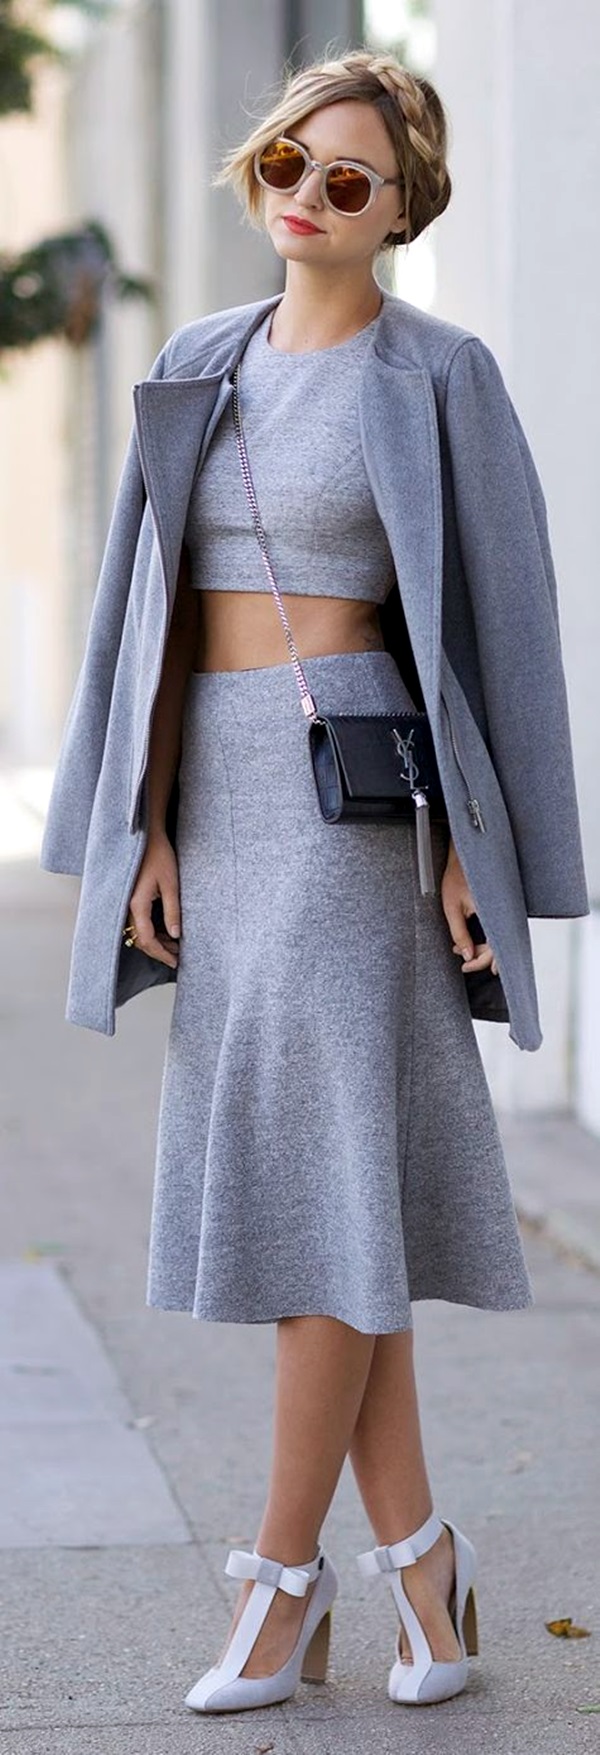 Shades of Grey Outfits Ideas (9)